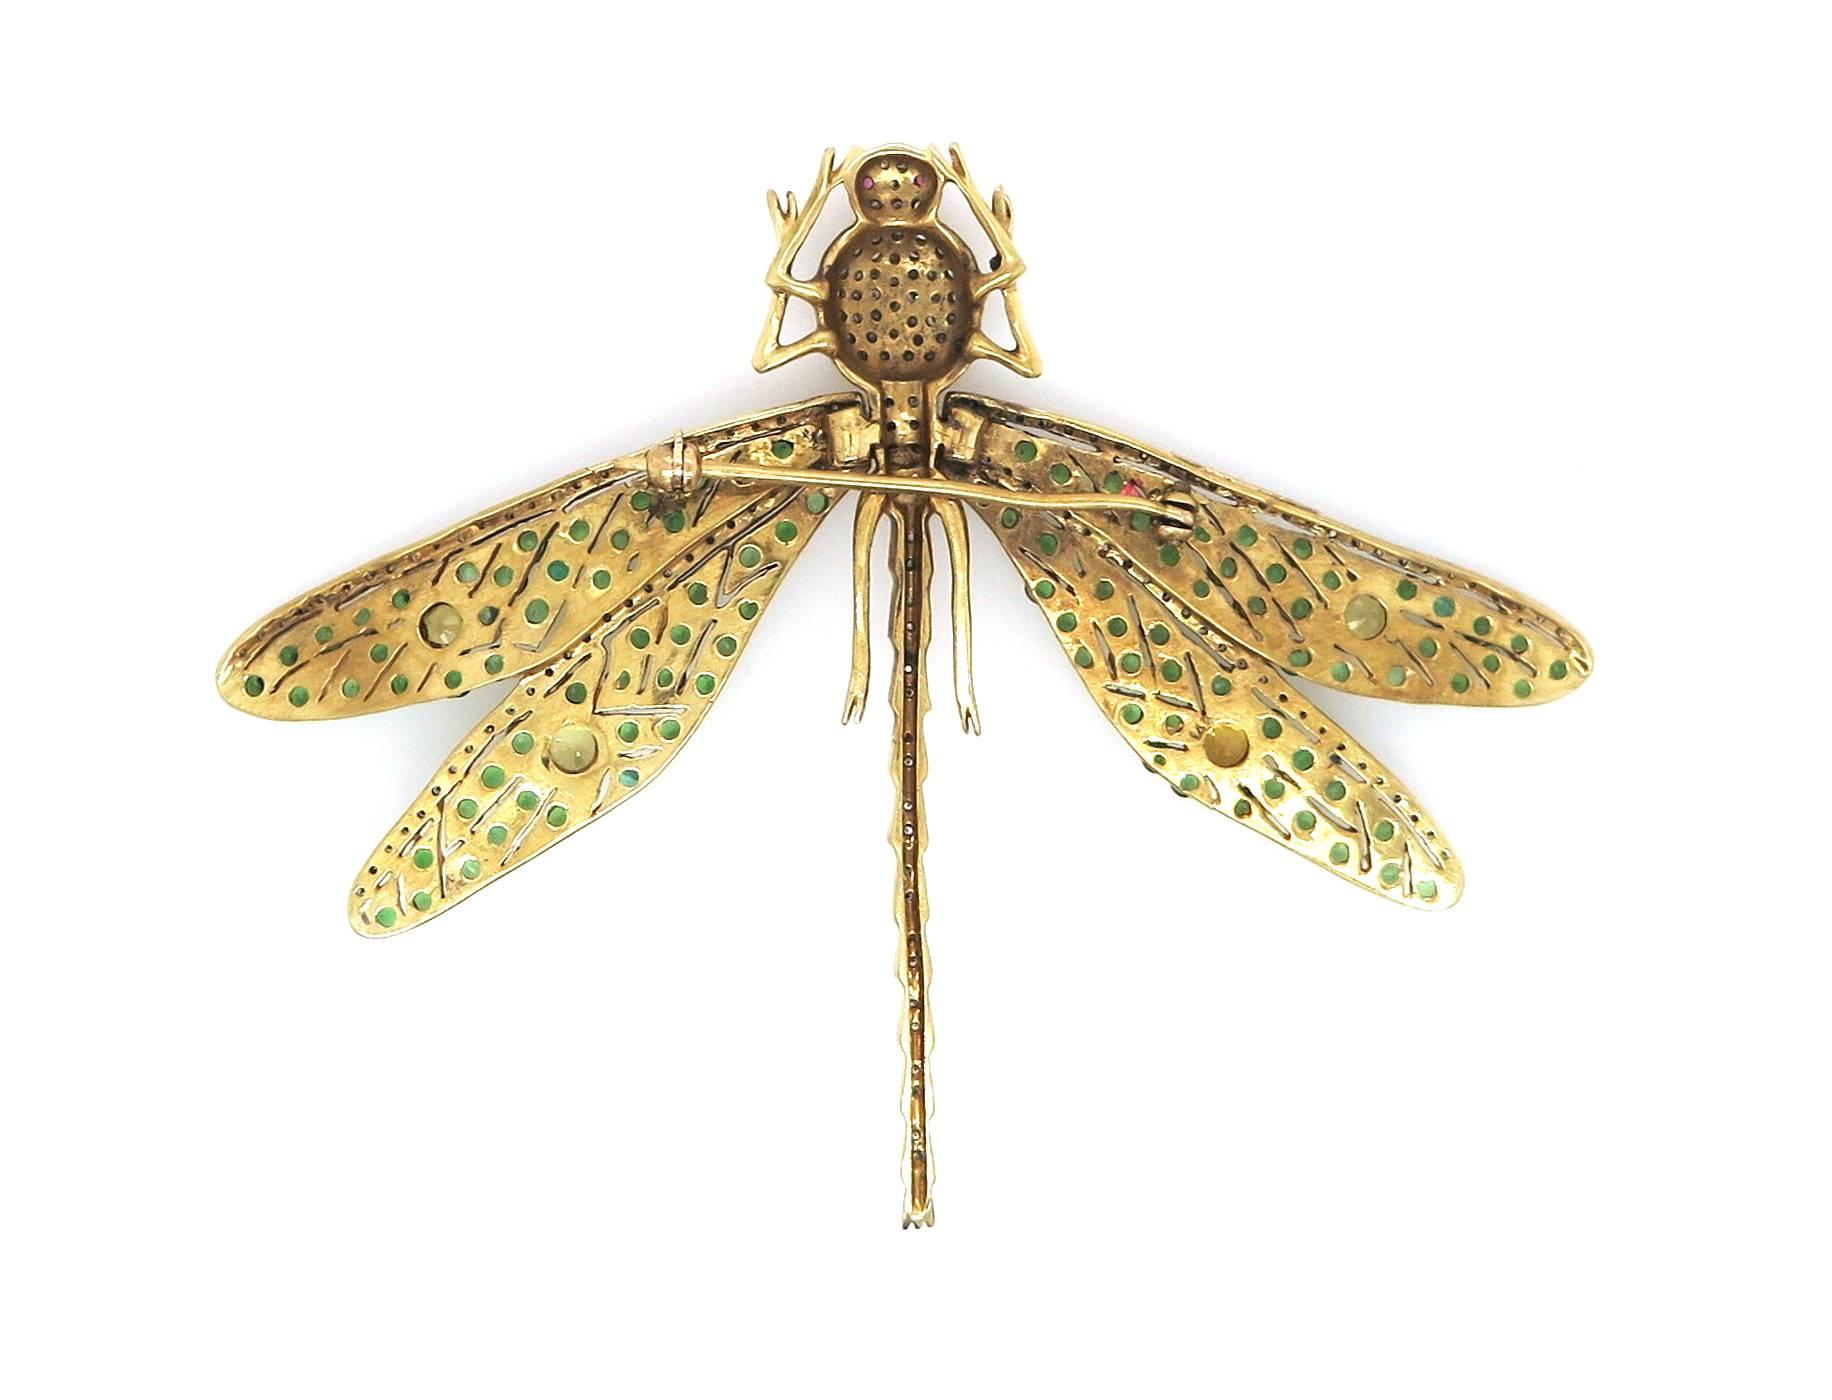 Featuring a 14 karat yellow gold vintage style dragonfly pin set with 107 natural Emeralds and 65 Round Brilliant Diamonds, 4 Citrines around the wings with 2 ruby eyes.
Estimated weight of the Emeralds – 2.14 carats
Estimated weight of the Diamonds